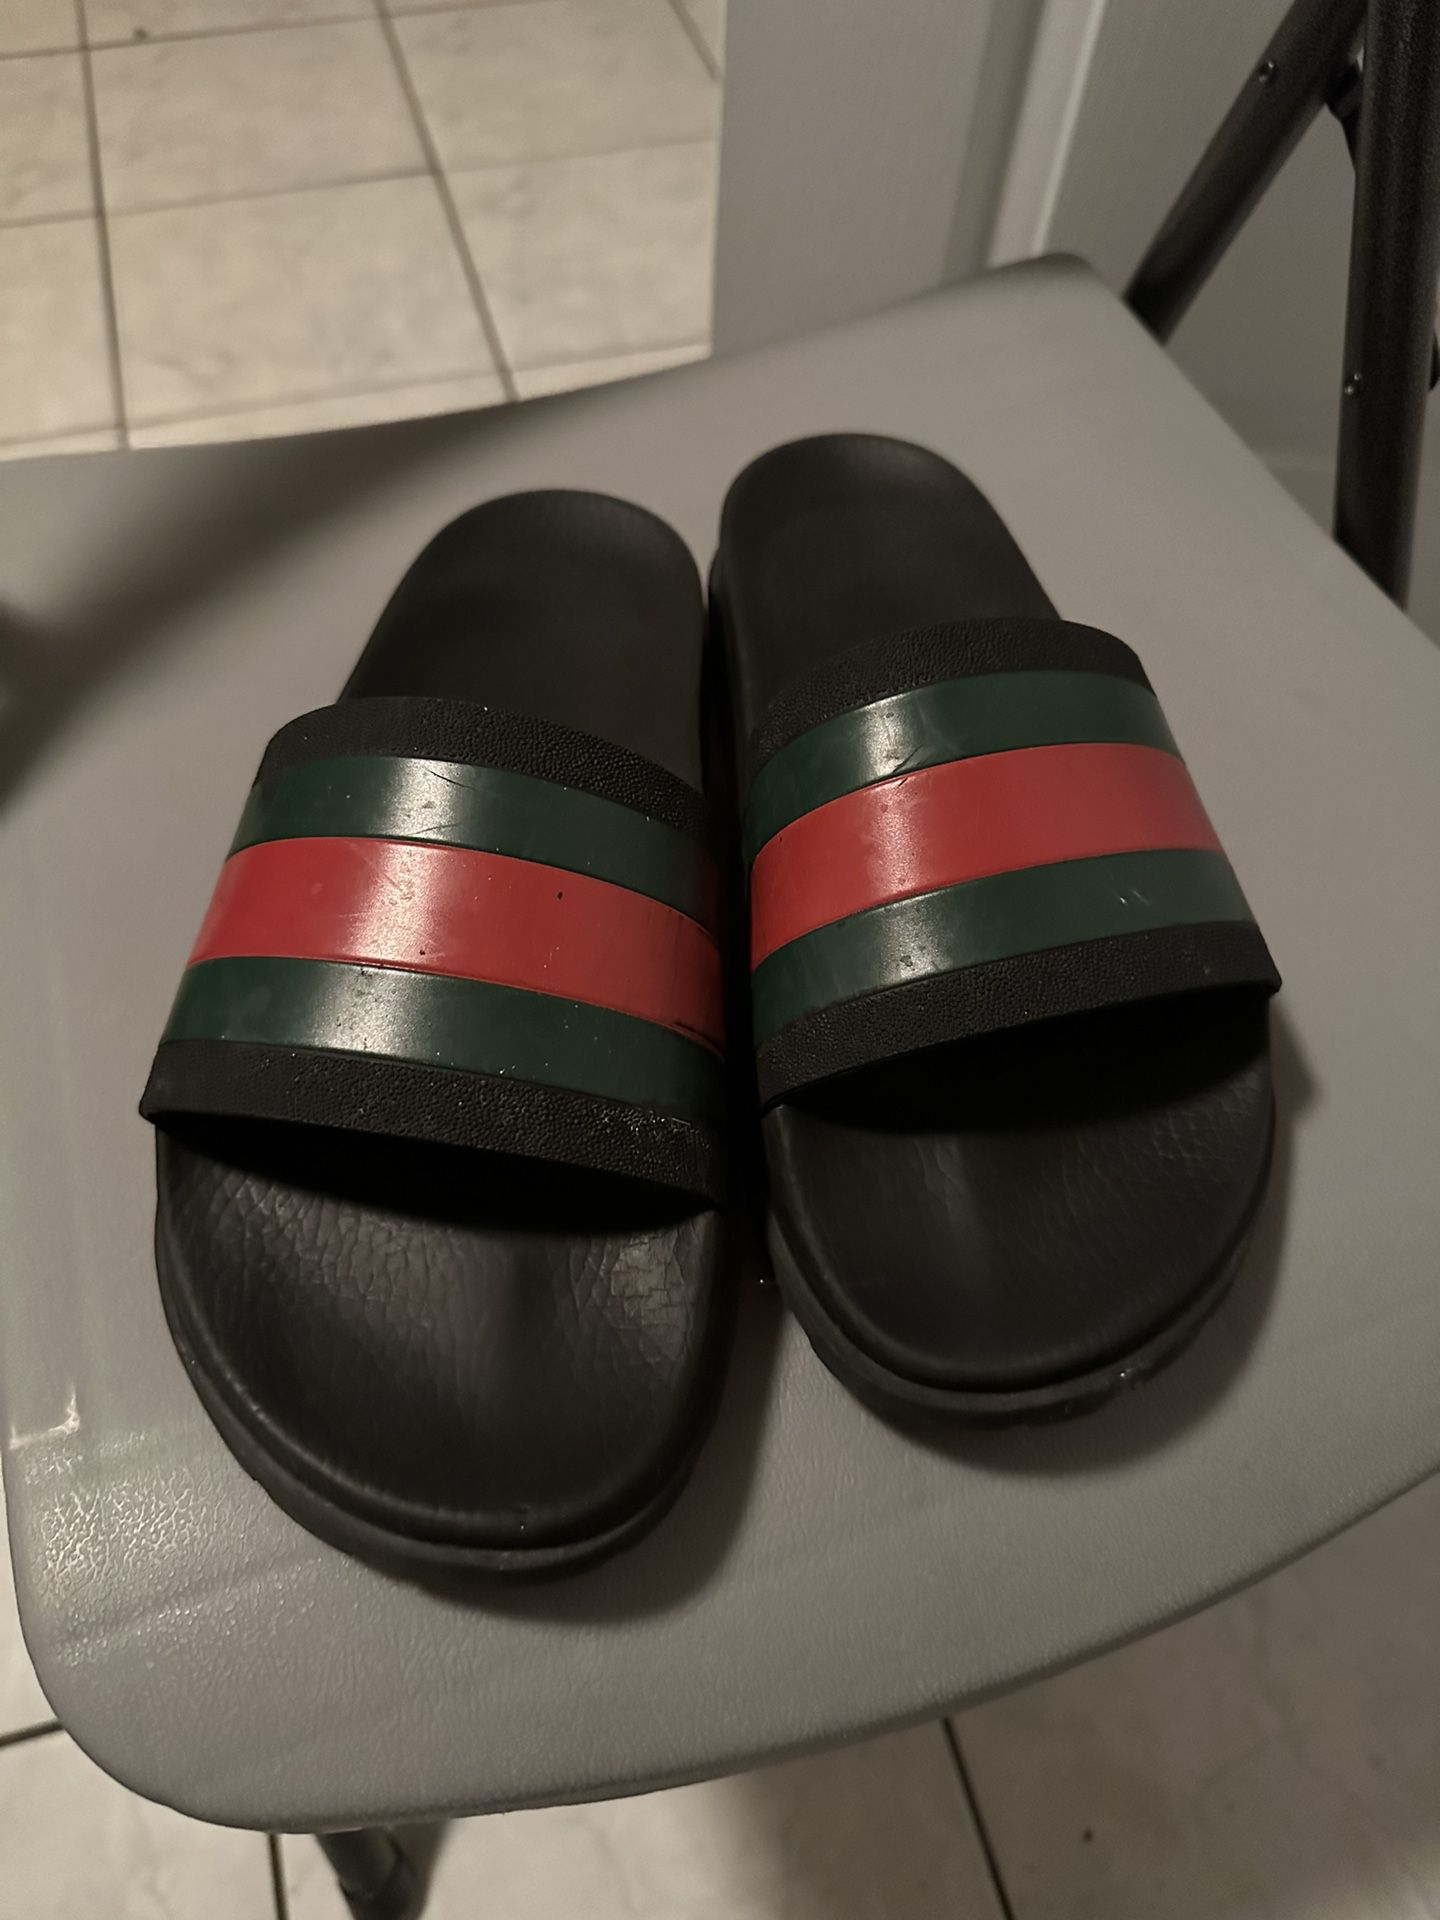 Gucci Sandals for Sale Houston, TX - OfferUp